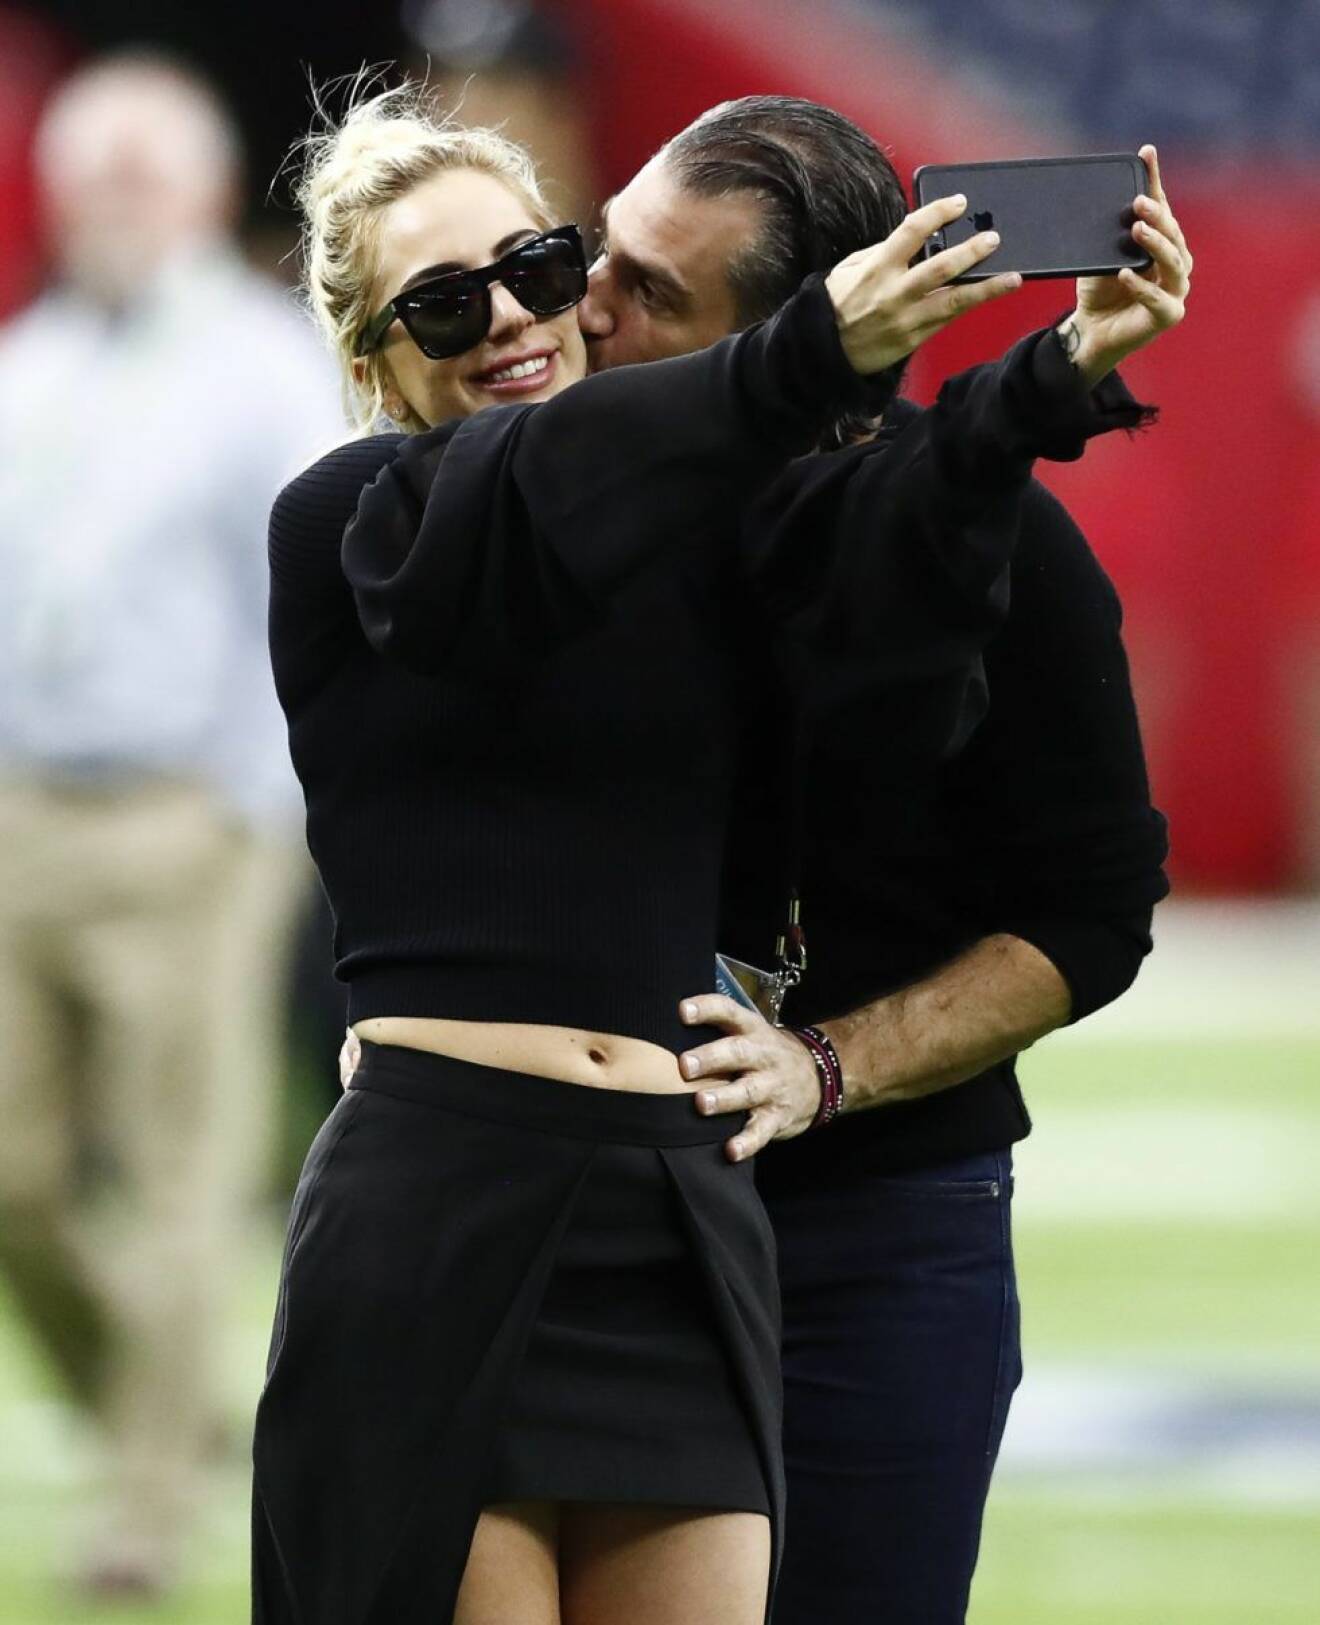 epaselect epa05773578 US singer Lady Gaga (L) takes a selfie with agent Christian Carino before the start of Super Bowl LI at NRG Stadium in Houston, Texas, USA, 05 February 2017. Lady Gaga is the Halftime Show performer. The AFC Champion Patriots play the NFC Champion Atlanta Falcons in the National Football League's annual championship game. EPA/LARRY W. SMITH